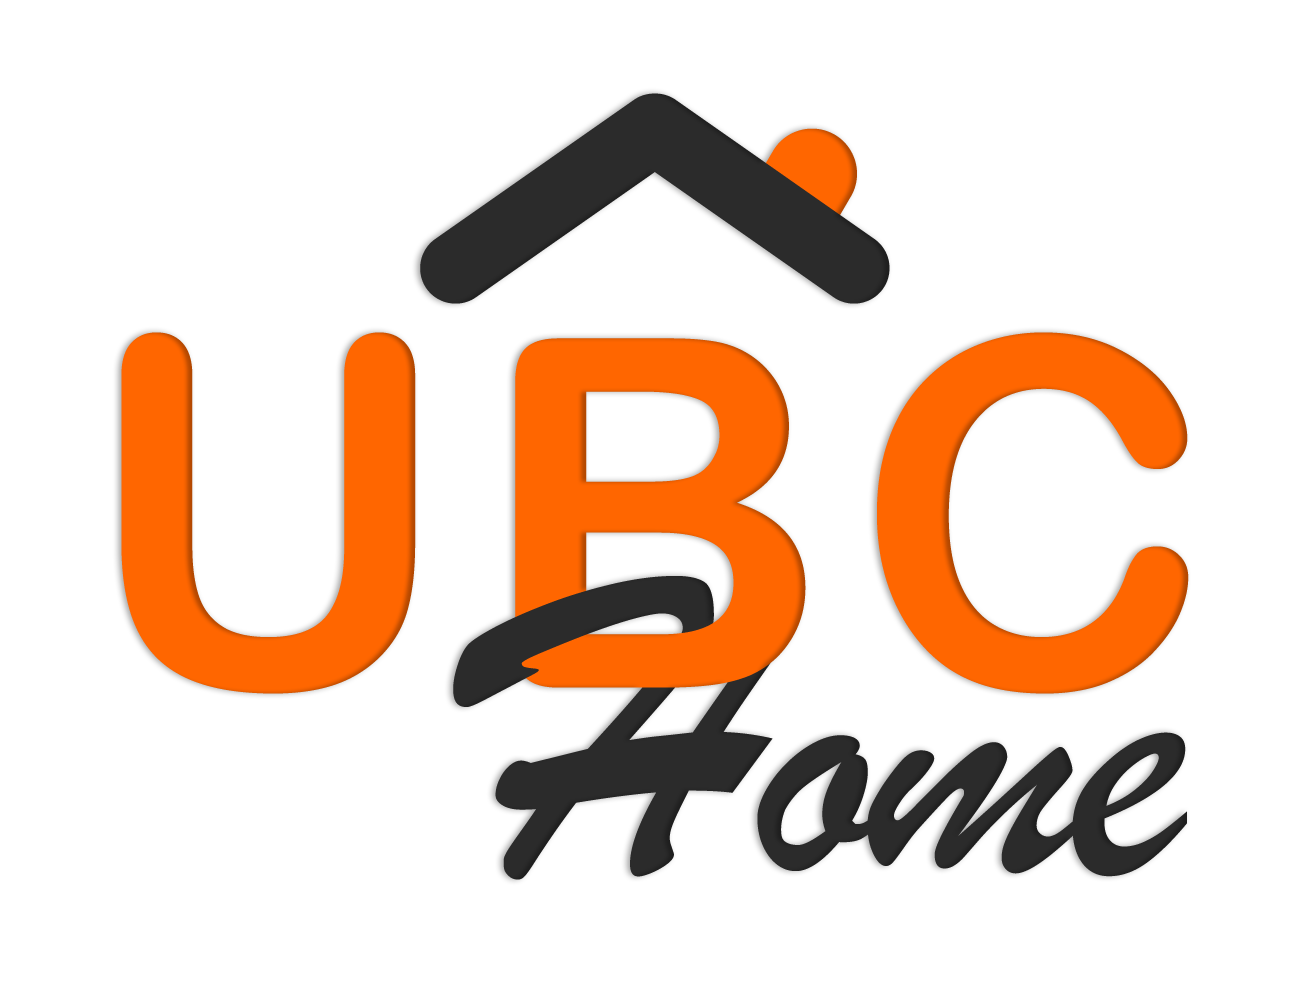 UBC Home - For furniture and accessories